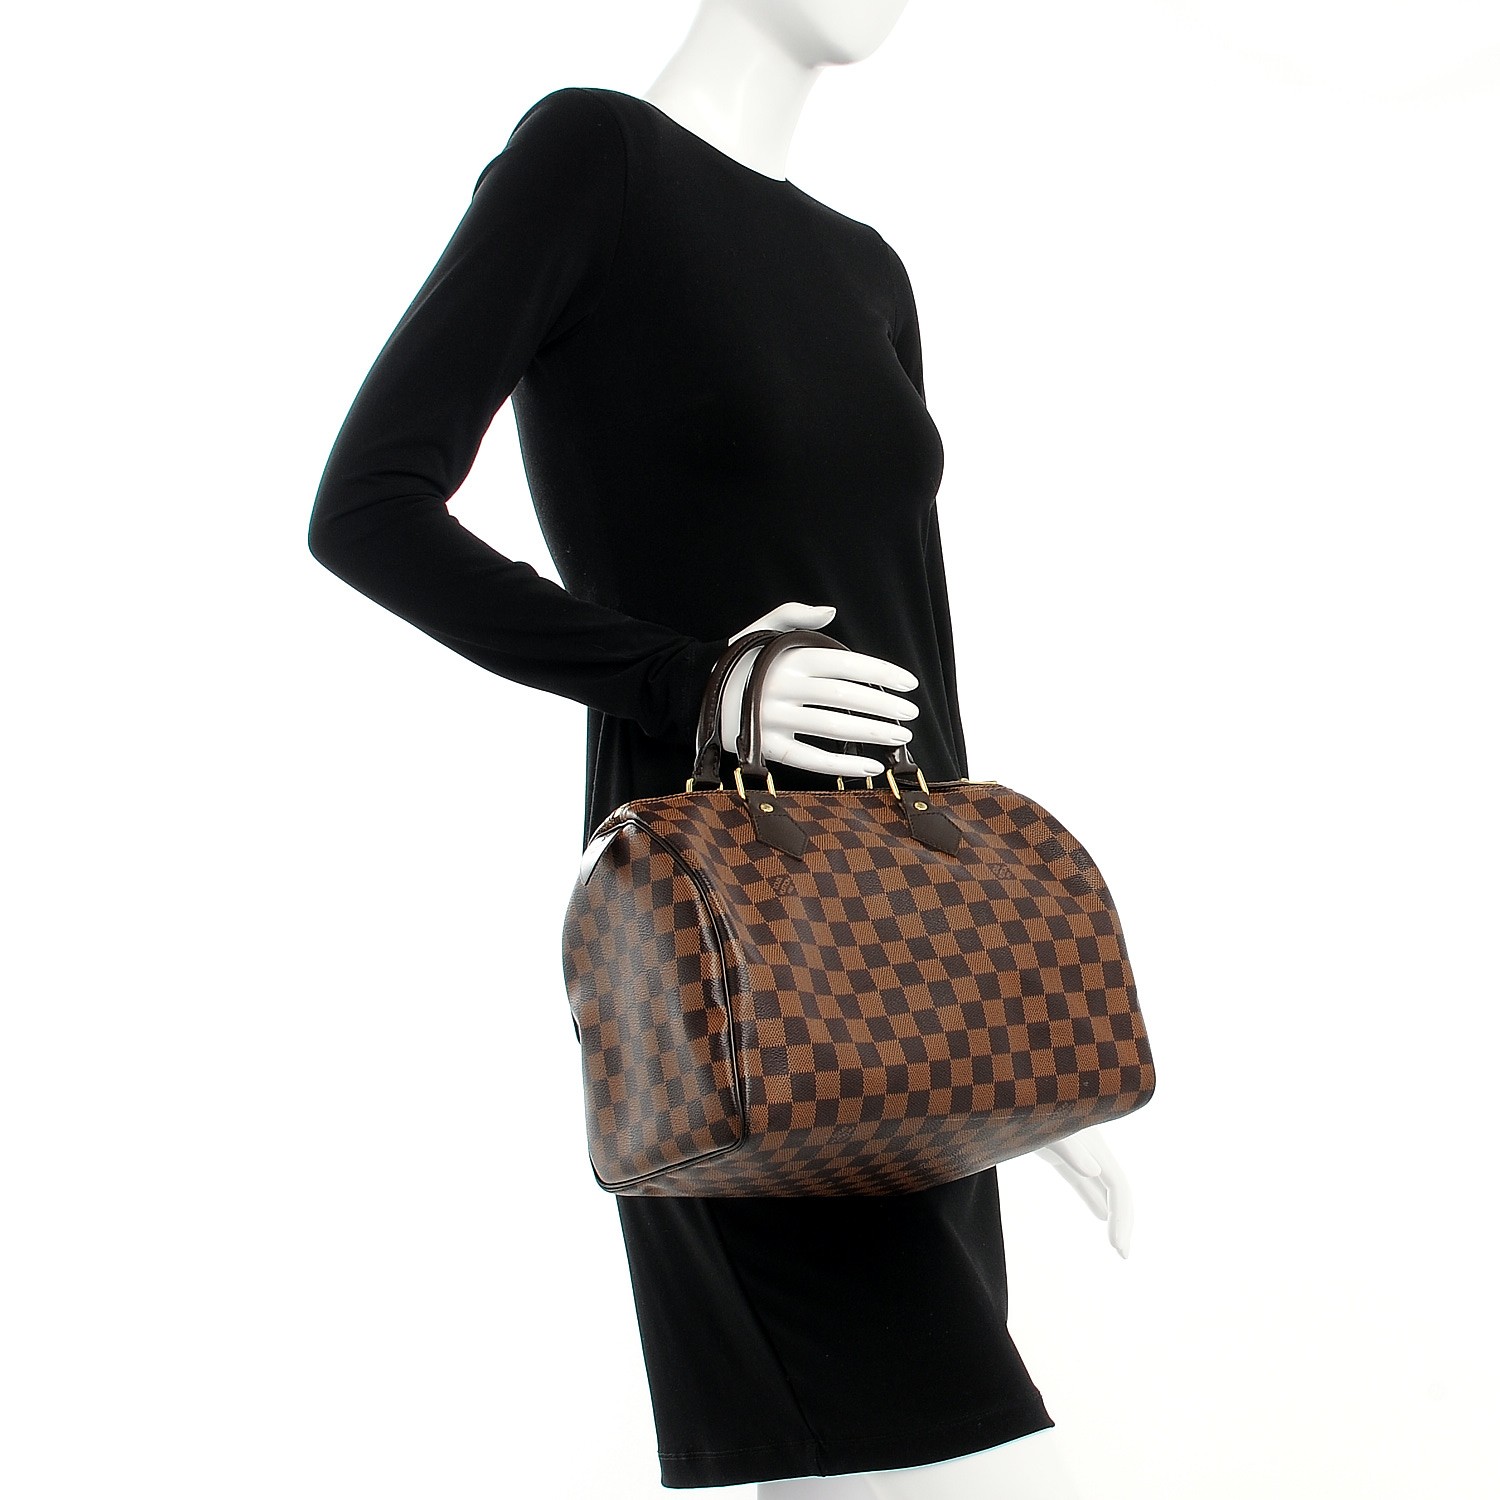 Away From Blue  Aussie Mum Style, Away From The Blue Jeans Rut: Dresses, Louis  Vuitton Speedy Bandouliere Bag in Damier Ebene